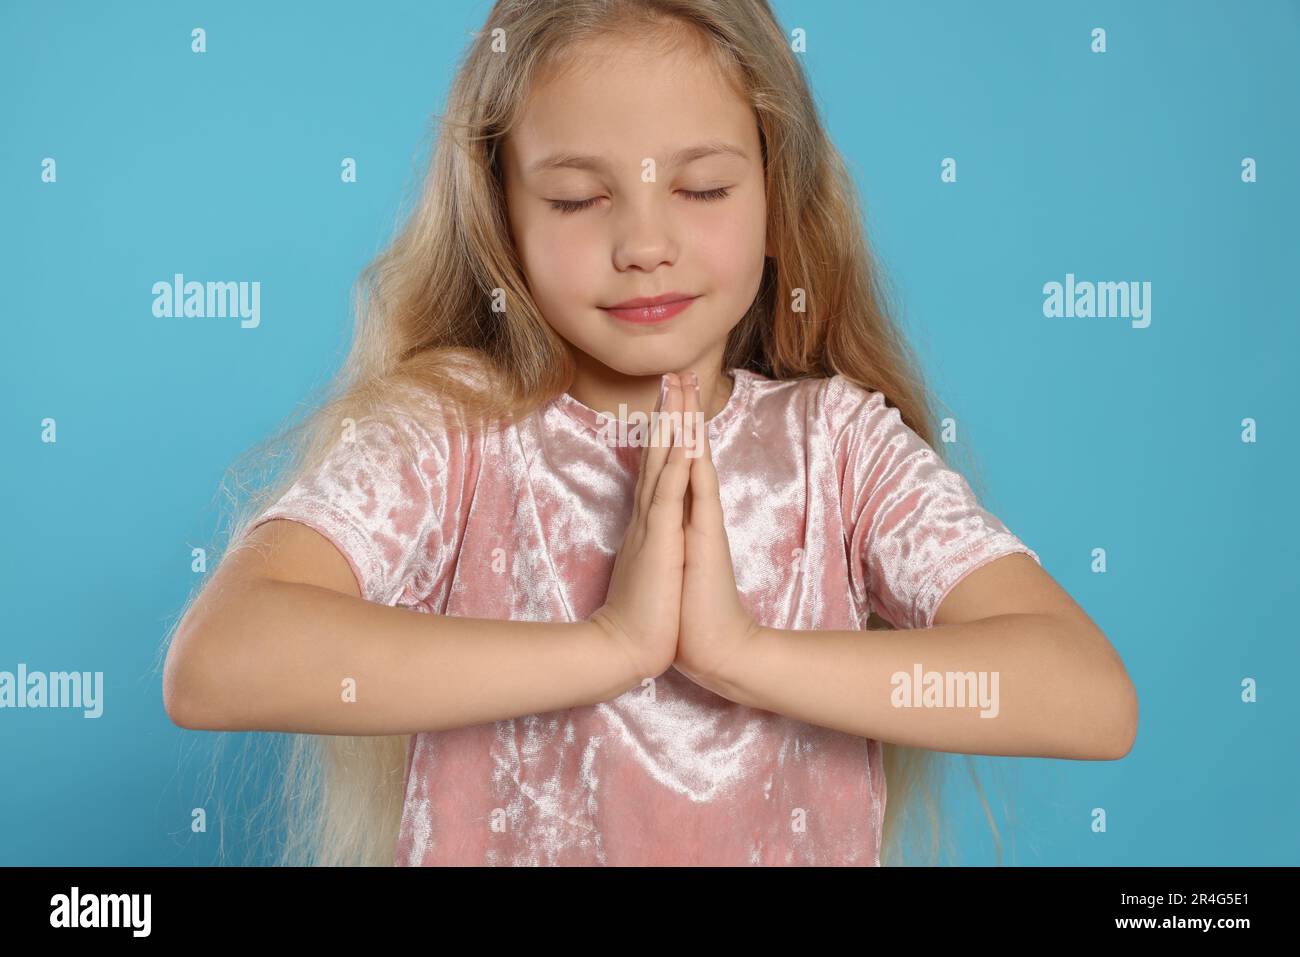 Beautiful girl with hands clasped together and closed eyes praying on light blue background Stock Photo